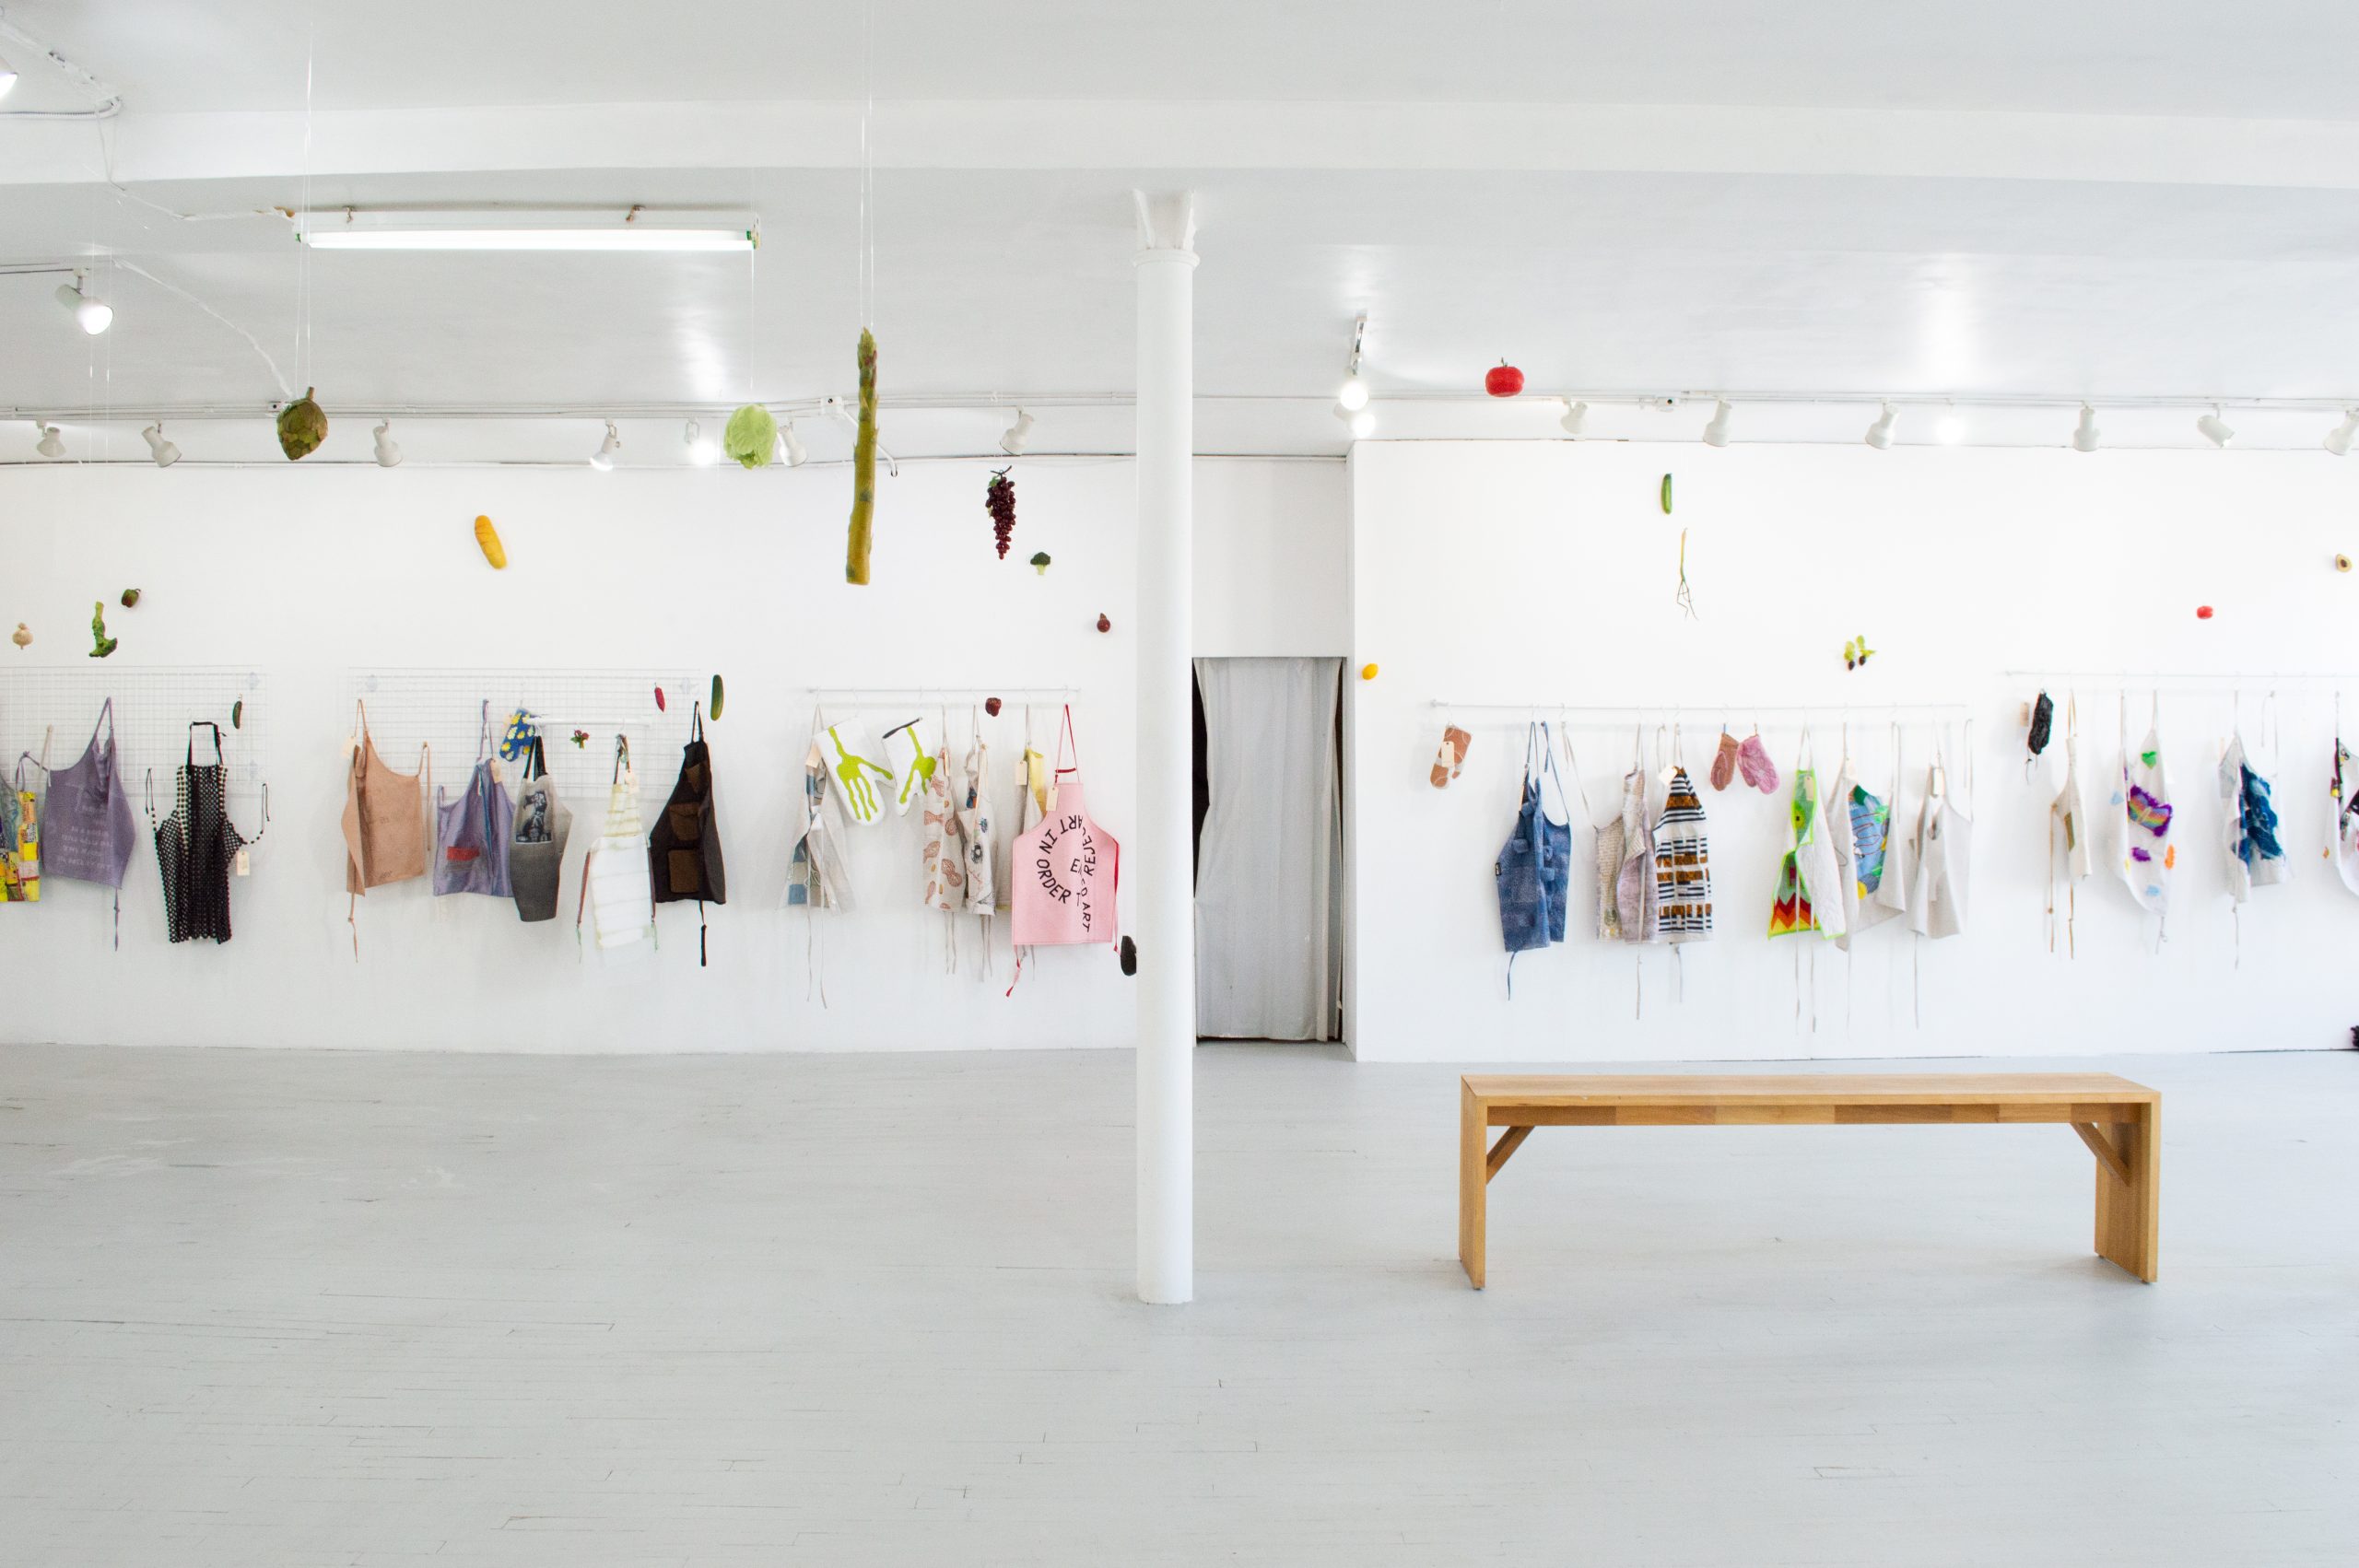 Featured image: Overview of LtdWear5 installed at the bright LVL3 gallery. The image is a landscape shot of about thirty colorful aprons and oven mitts displayed on racks on the far white wall of LVL3 gallery. In the midground of the shot is a long wooden bench and a white pole that cuts the gallery in half. Hanging from the ceiling are large plastic fruits and vegetables, including asparagus, grapes, and tomatoes. On the far wall, a large plastic baguette is hung on the wall as well offering a cheery, kitschy feeling to the gallery. Photo courtesy of LVL3.